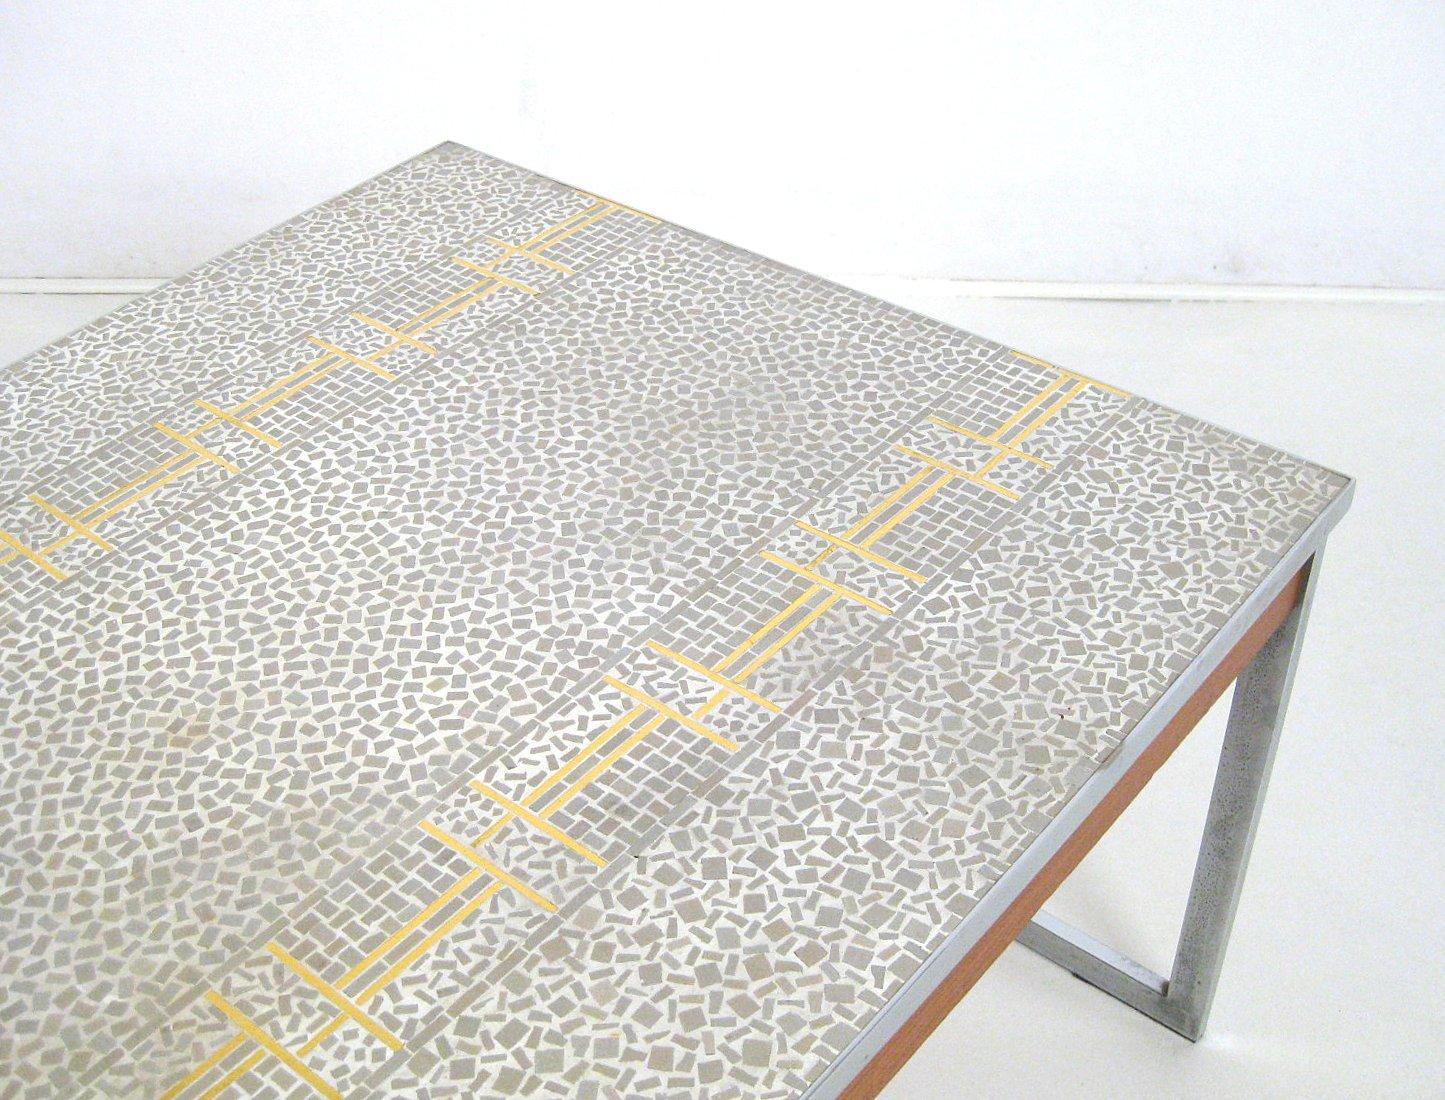 Large Mosaic coffee table, 1960s. Frame in chrome-plated metal and wood veneer. Mosaic tile top in gray and gold.